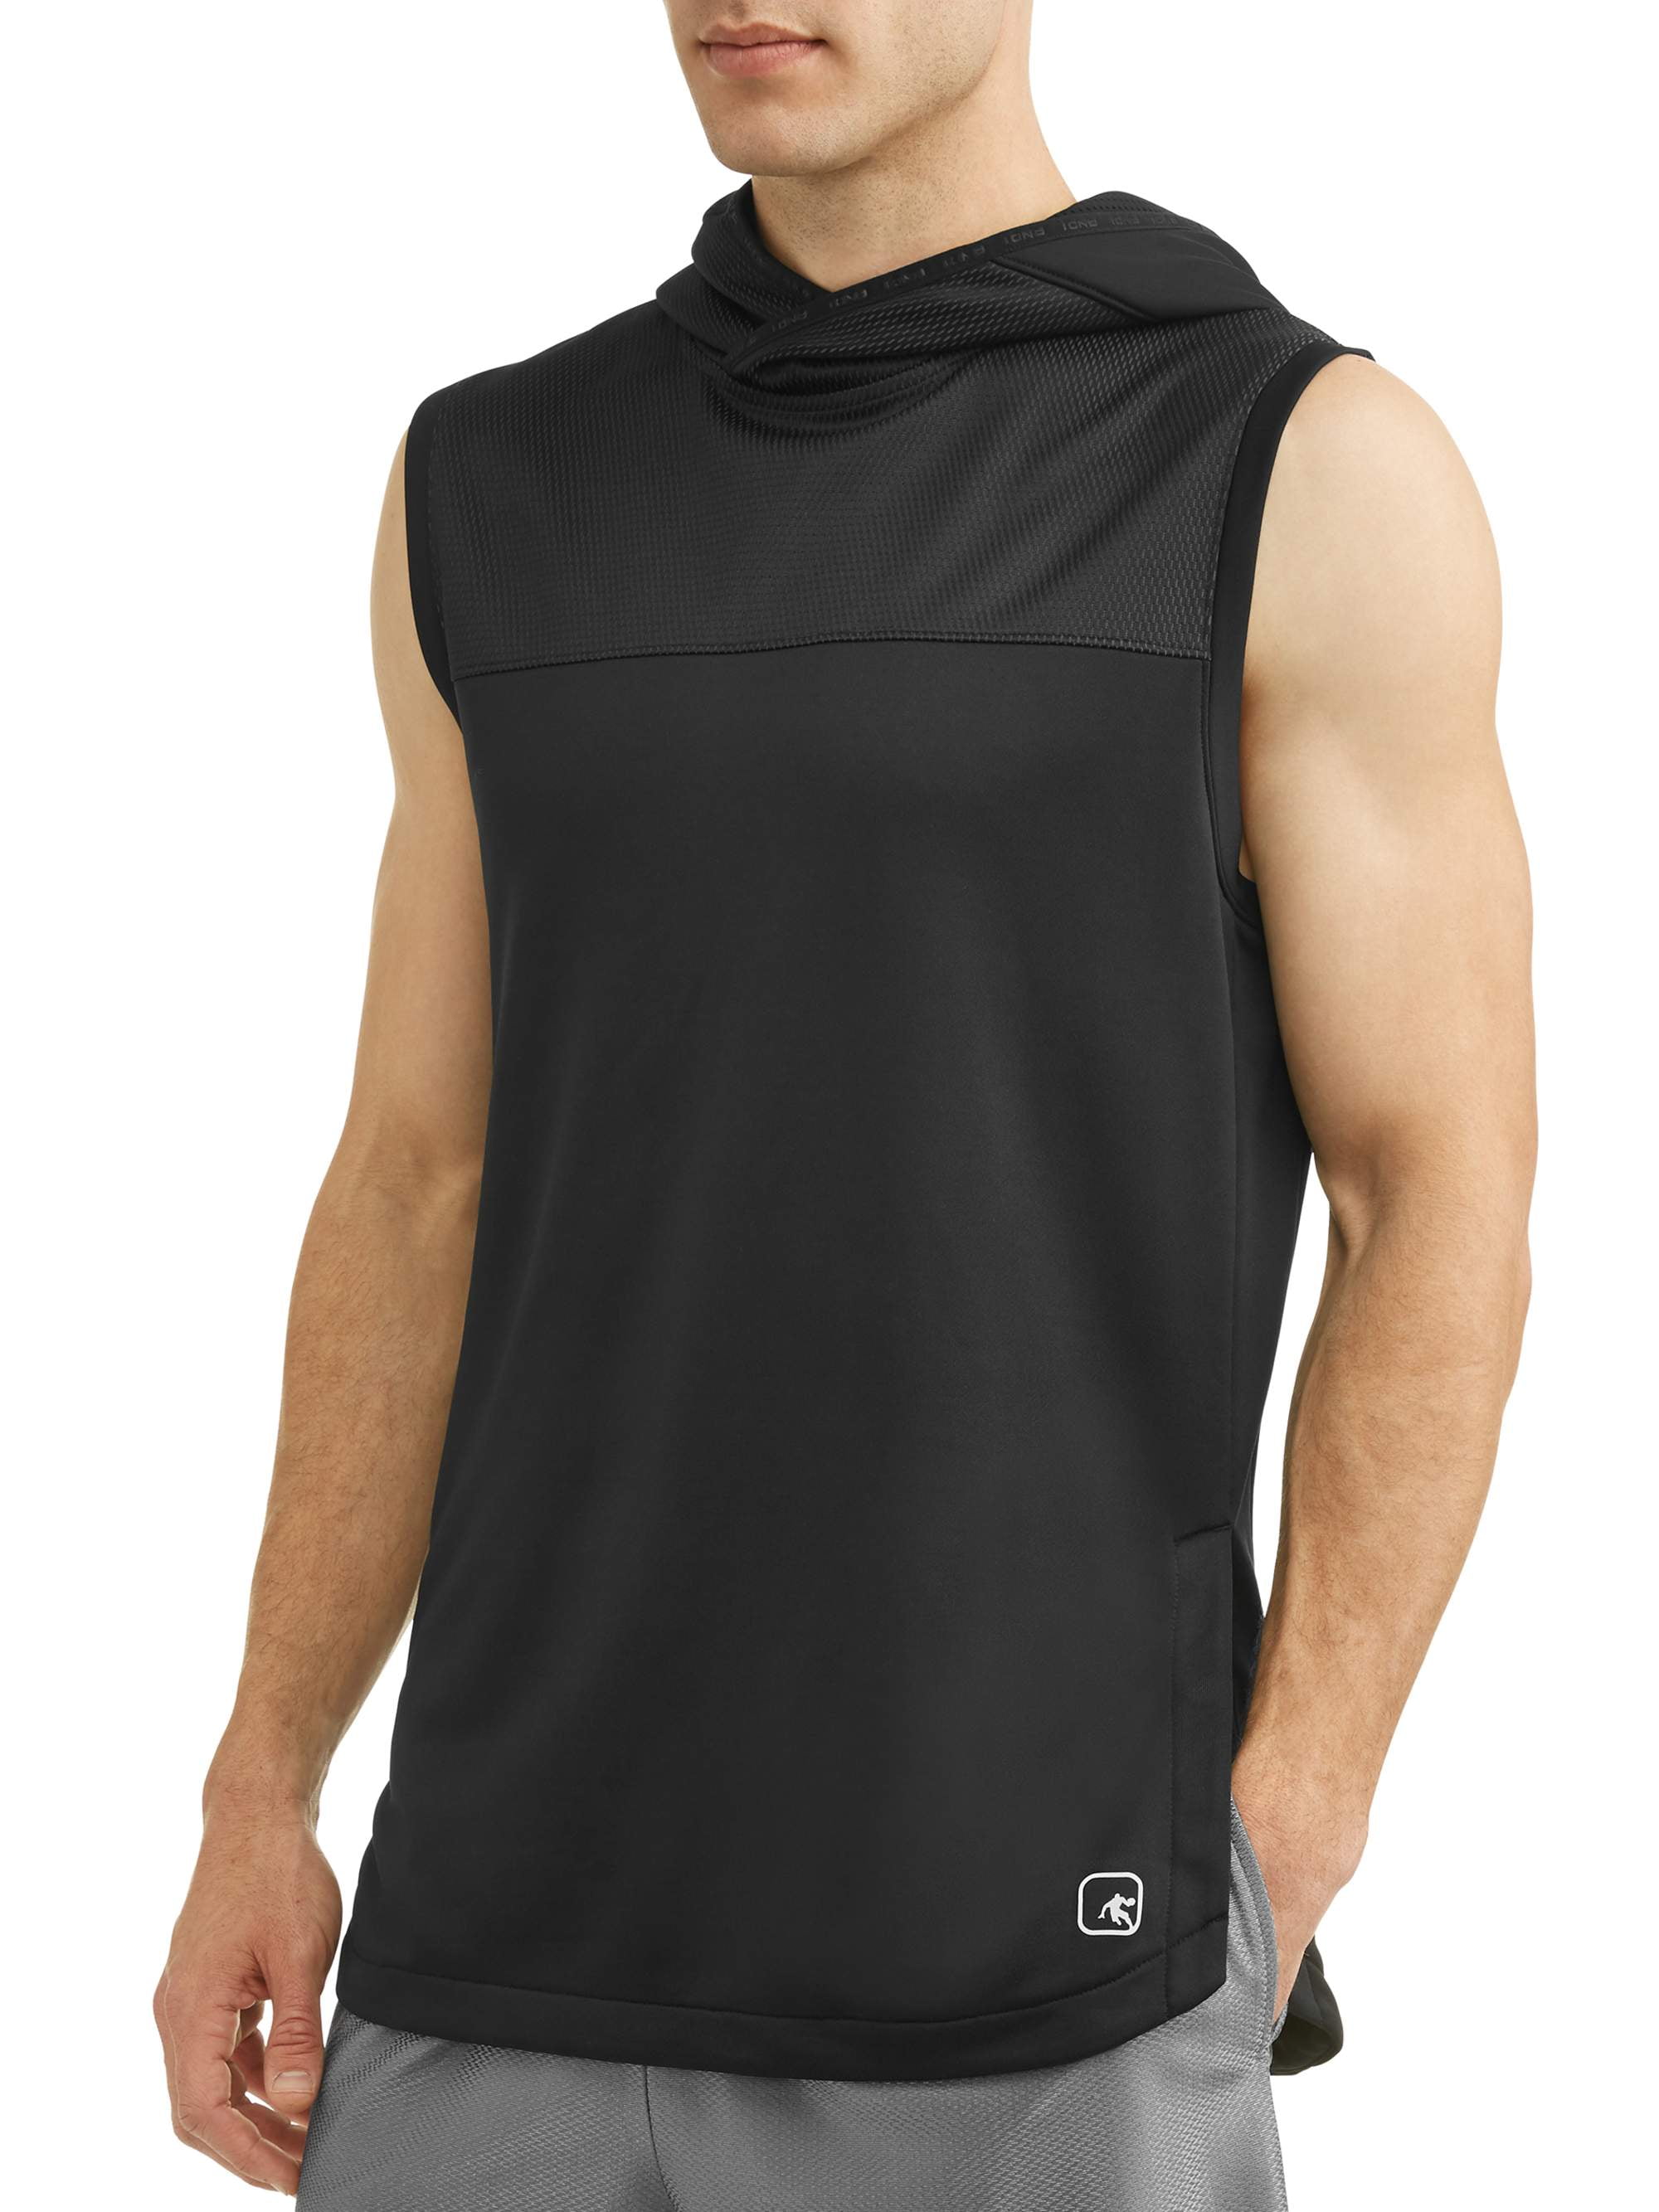 AND1 Men's French Terry Sleeveless Hoodie - Walmart.com